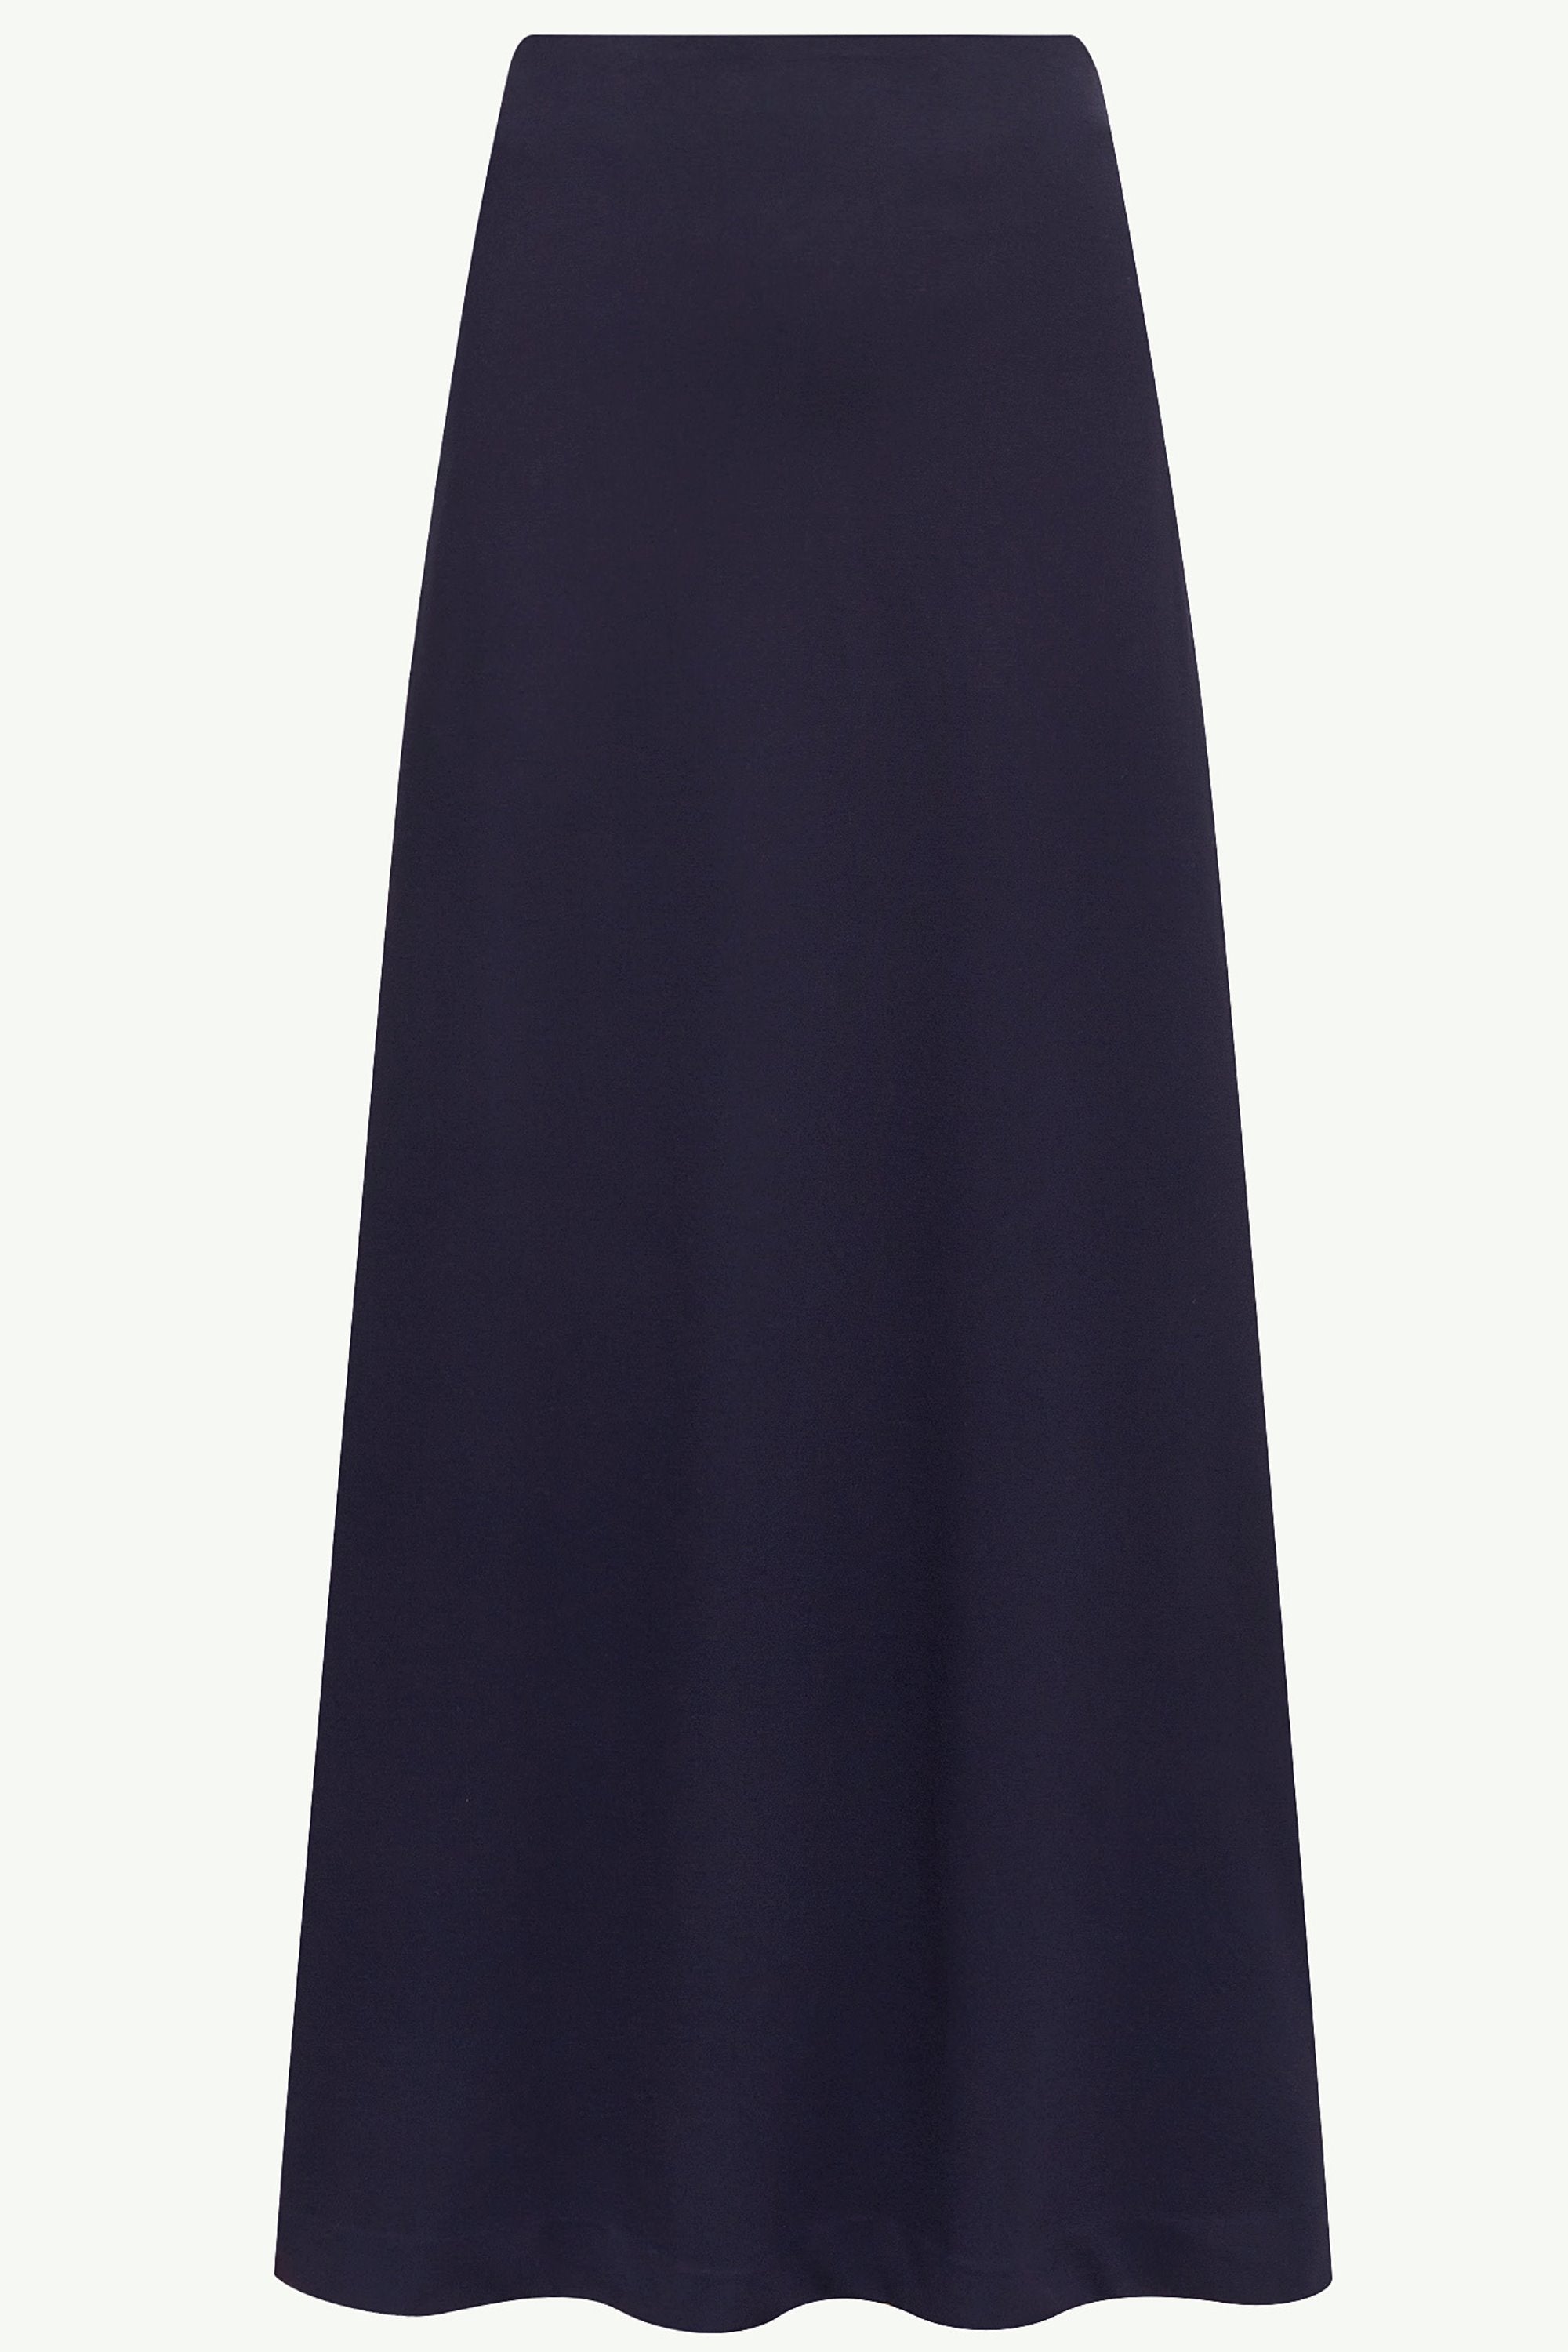 Essential Jersey A-Line Maxi Skirt - Navy Blue Clothing epschoolboard 